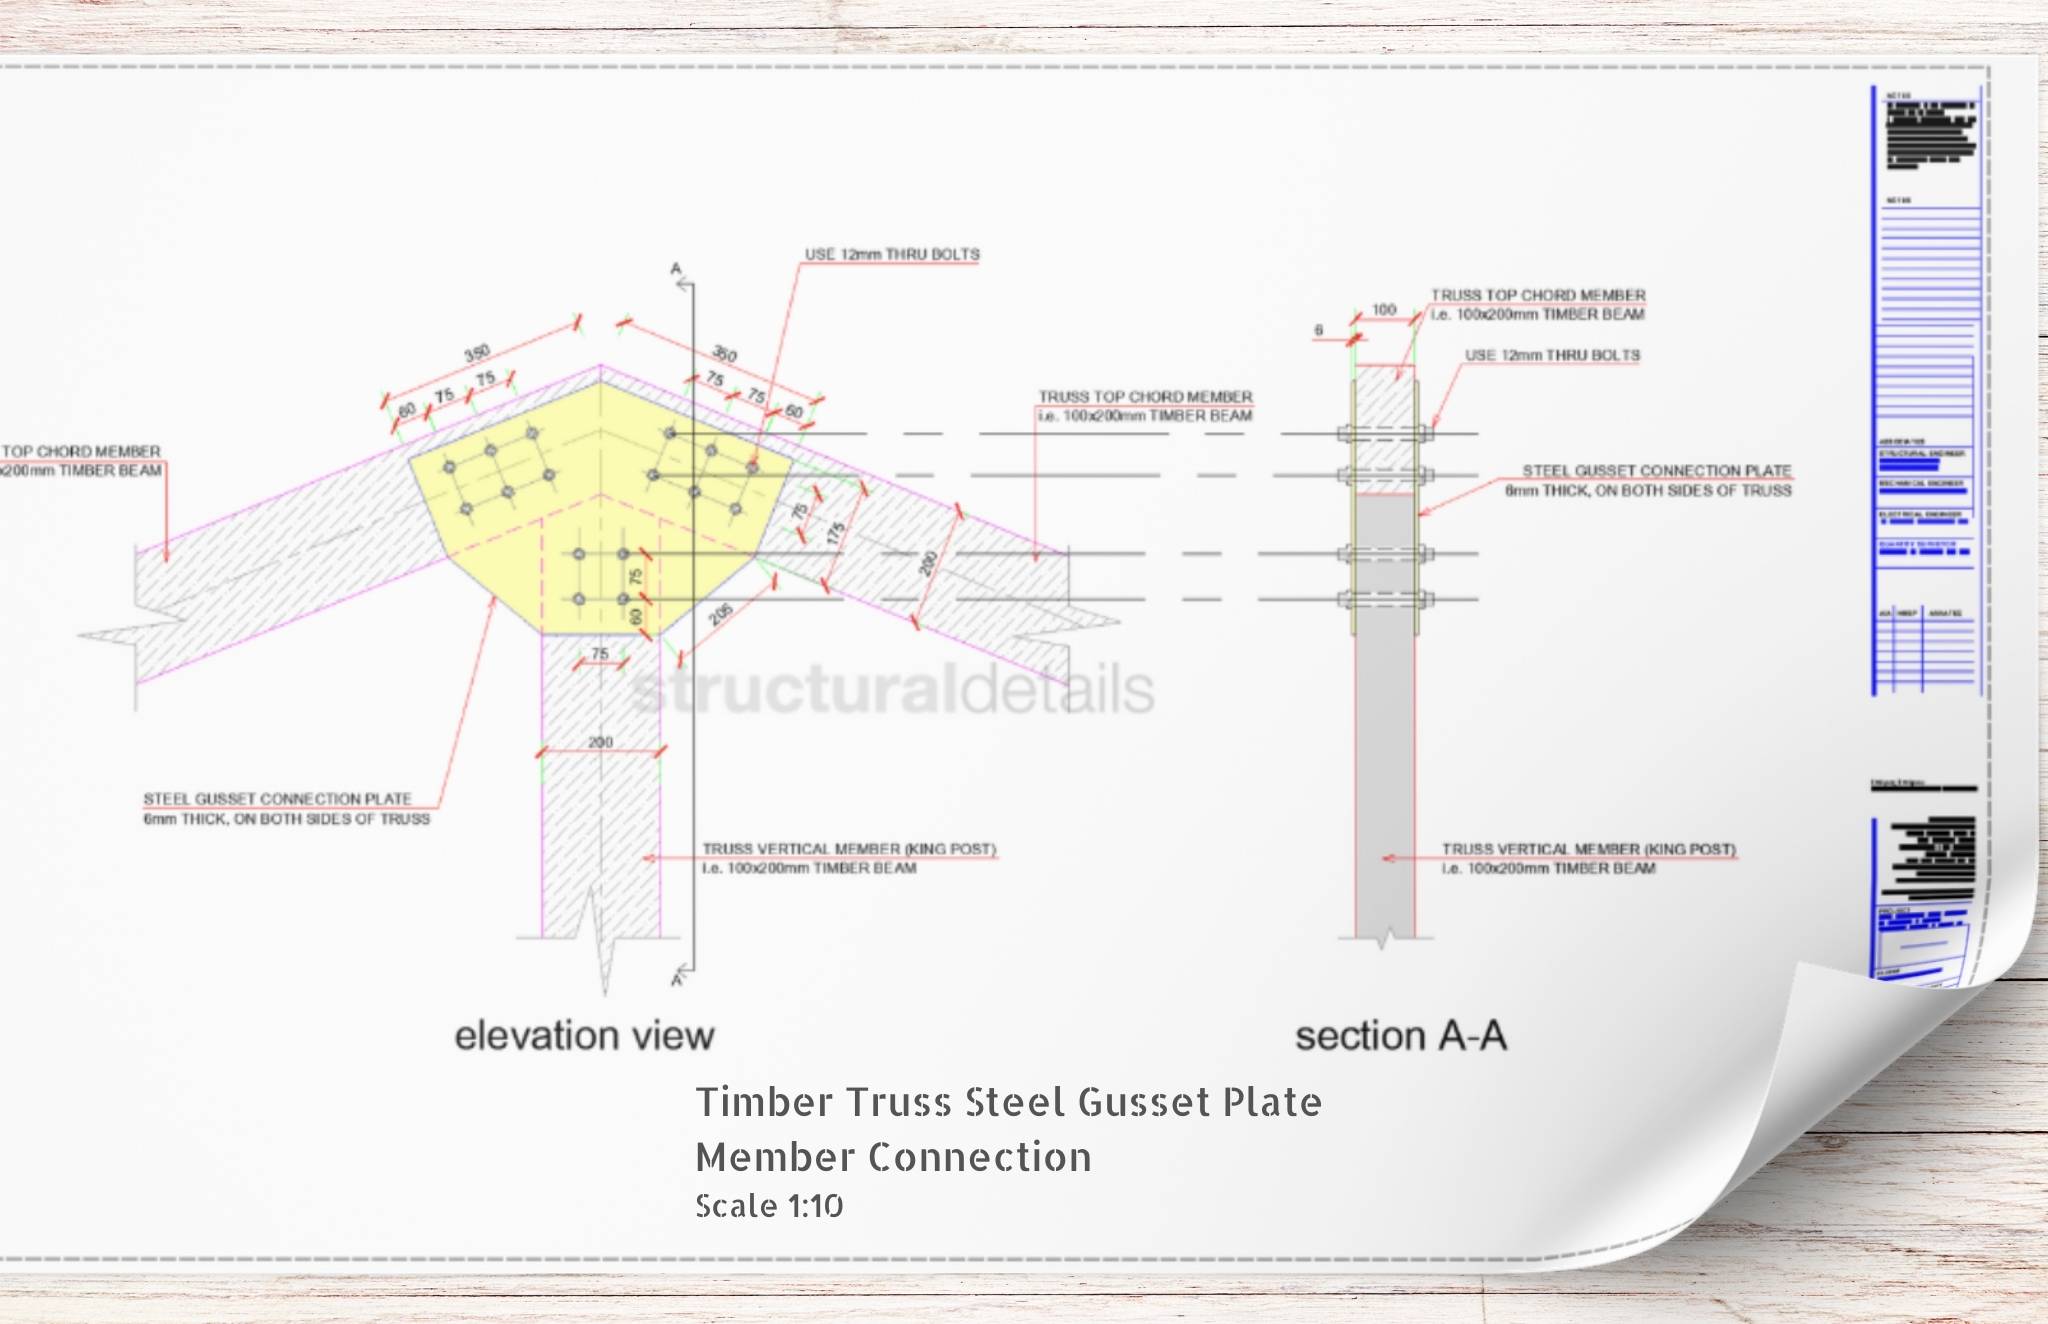 Timber Truss Steel Gusset Plate Member Connection